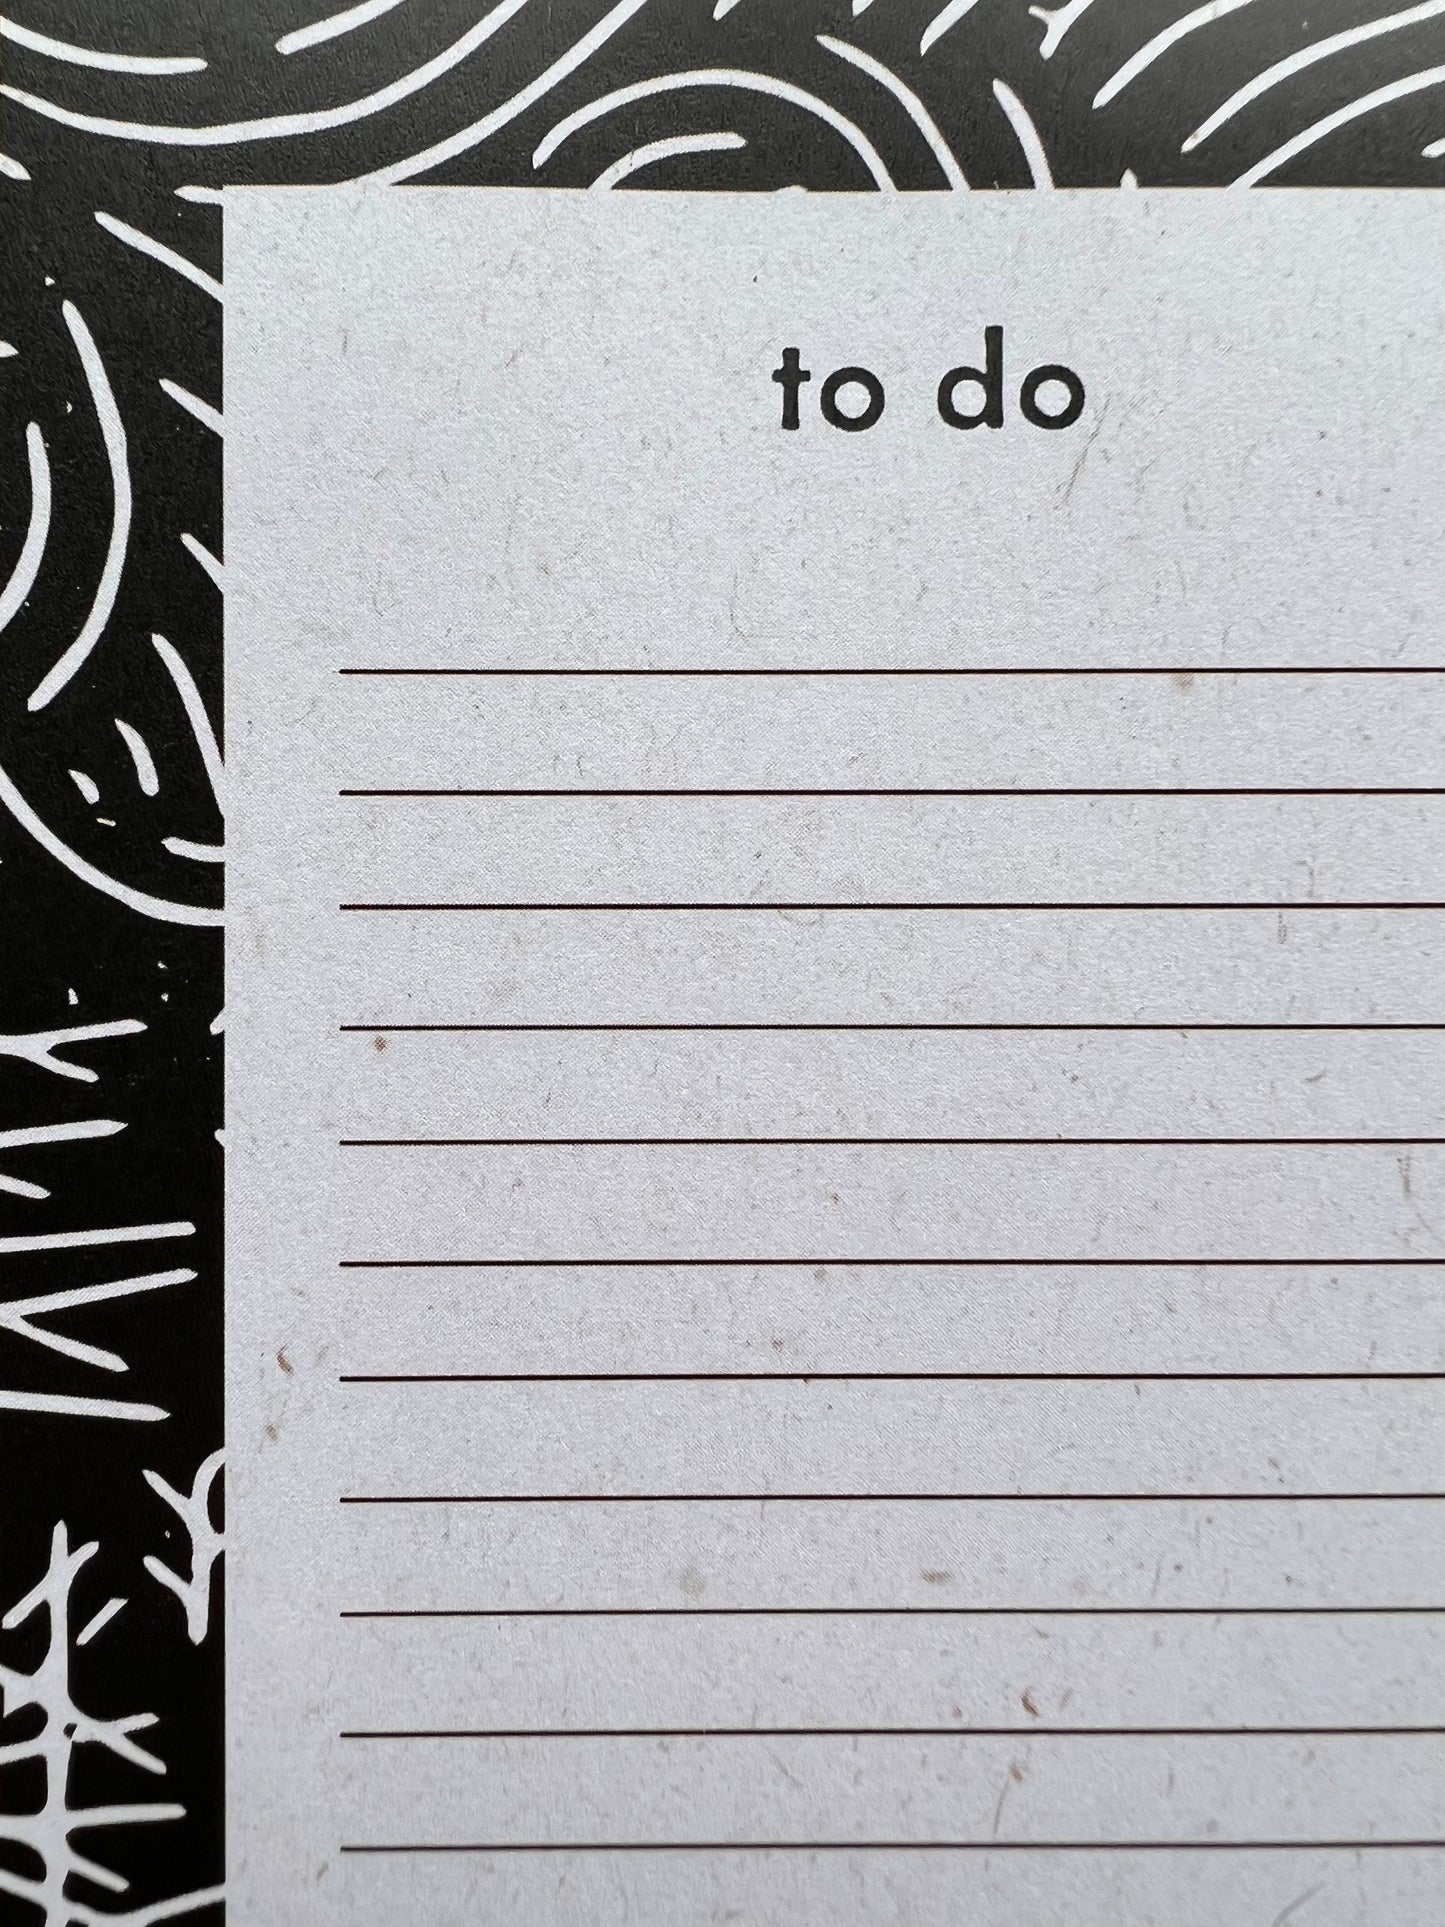 Pine Forest To Do List Notepad 4x9” | 50 Sheet Linocut Illustrated Notepad